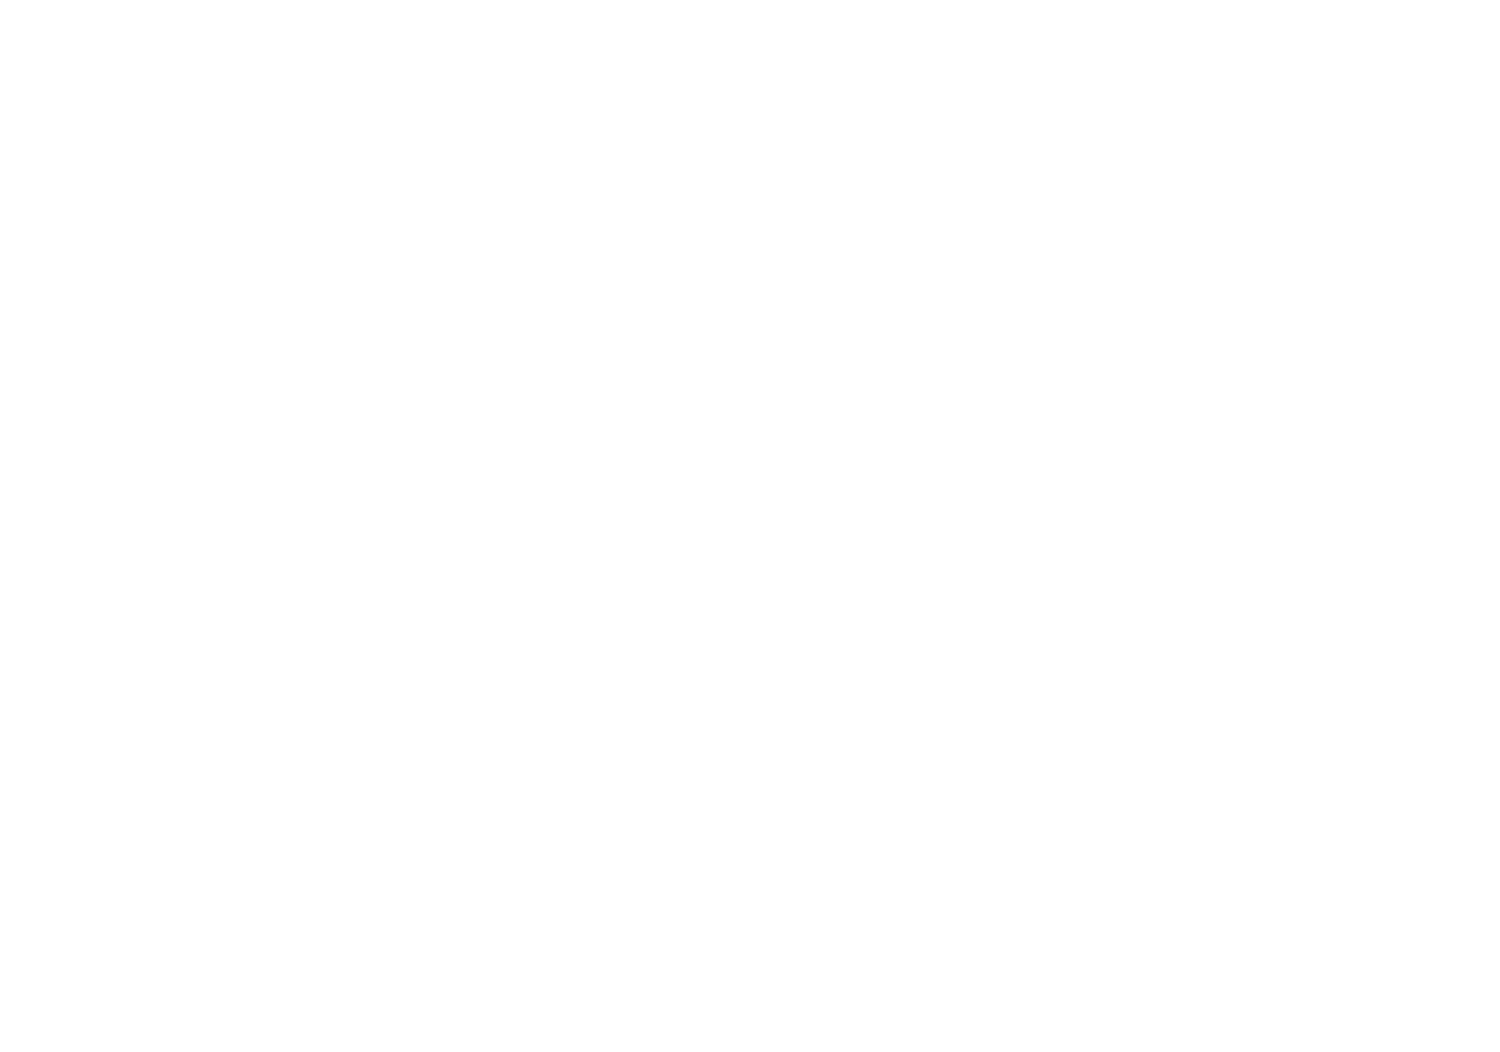 Tice Tables